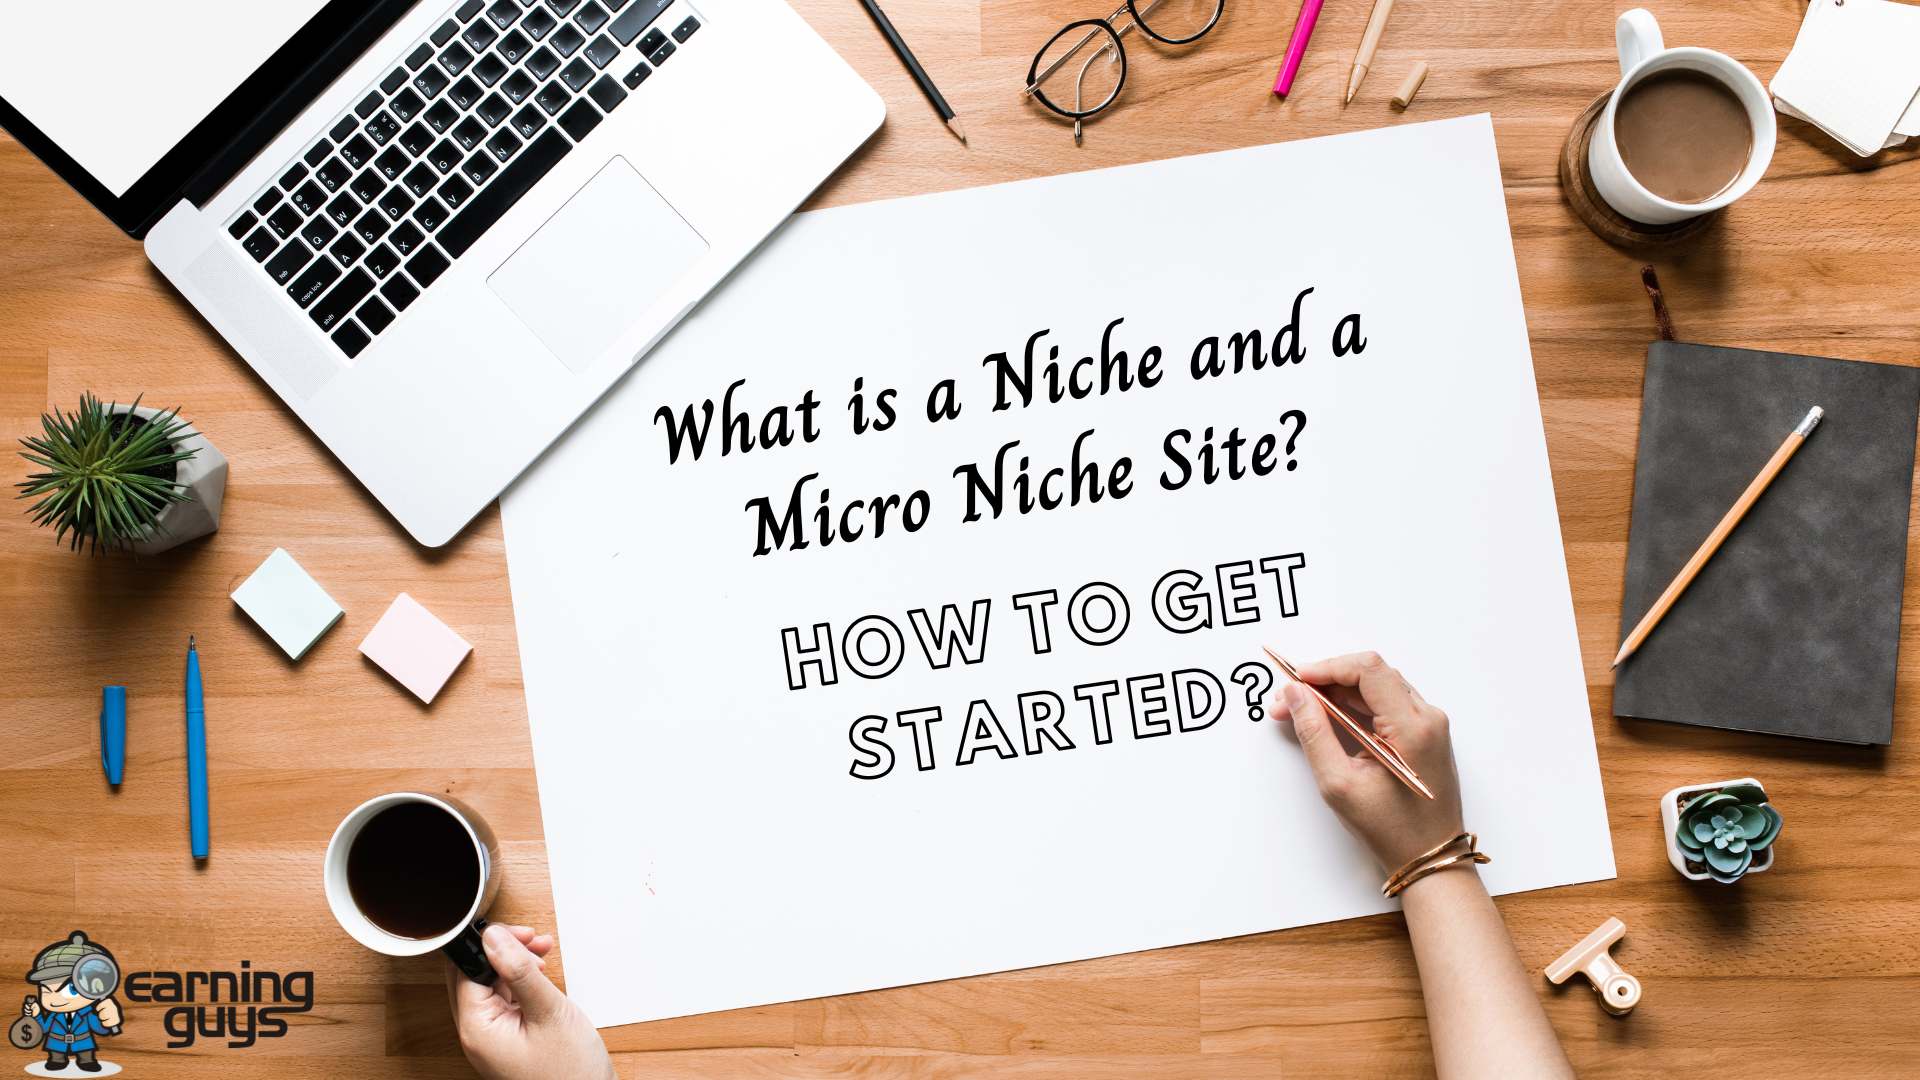 What is a Niche Site and Micro Niche Site? And How to get started?